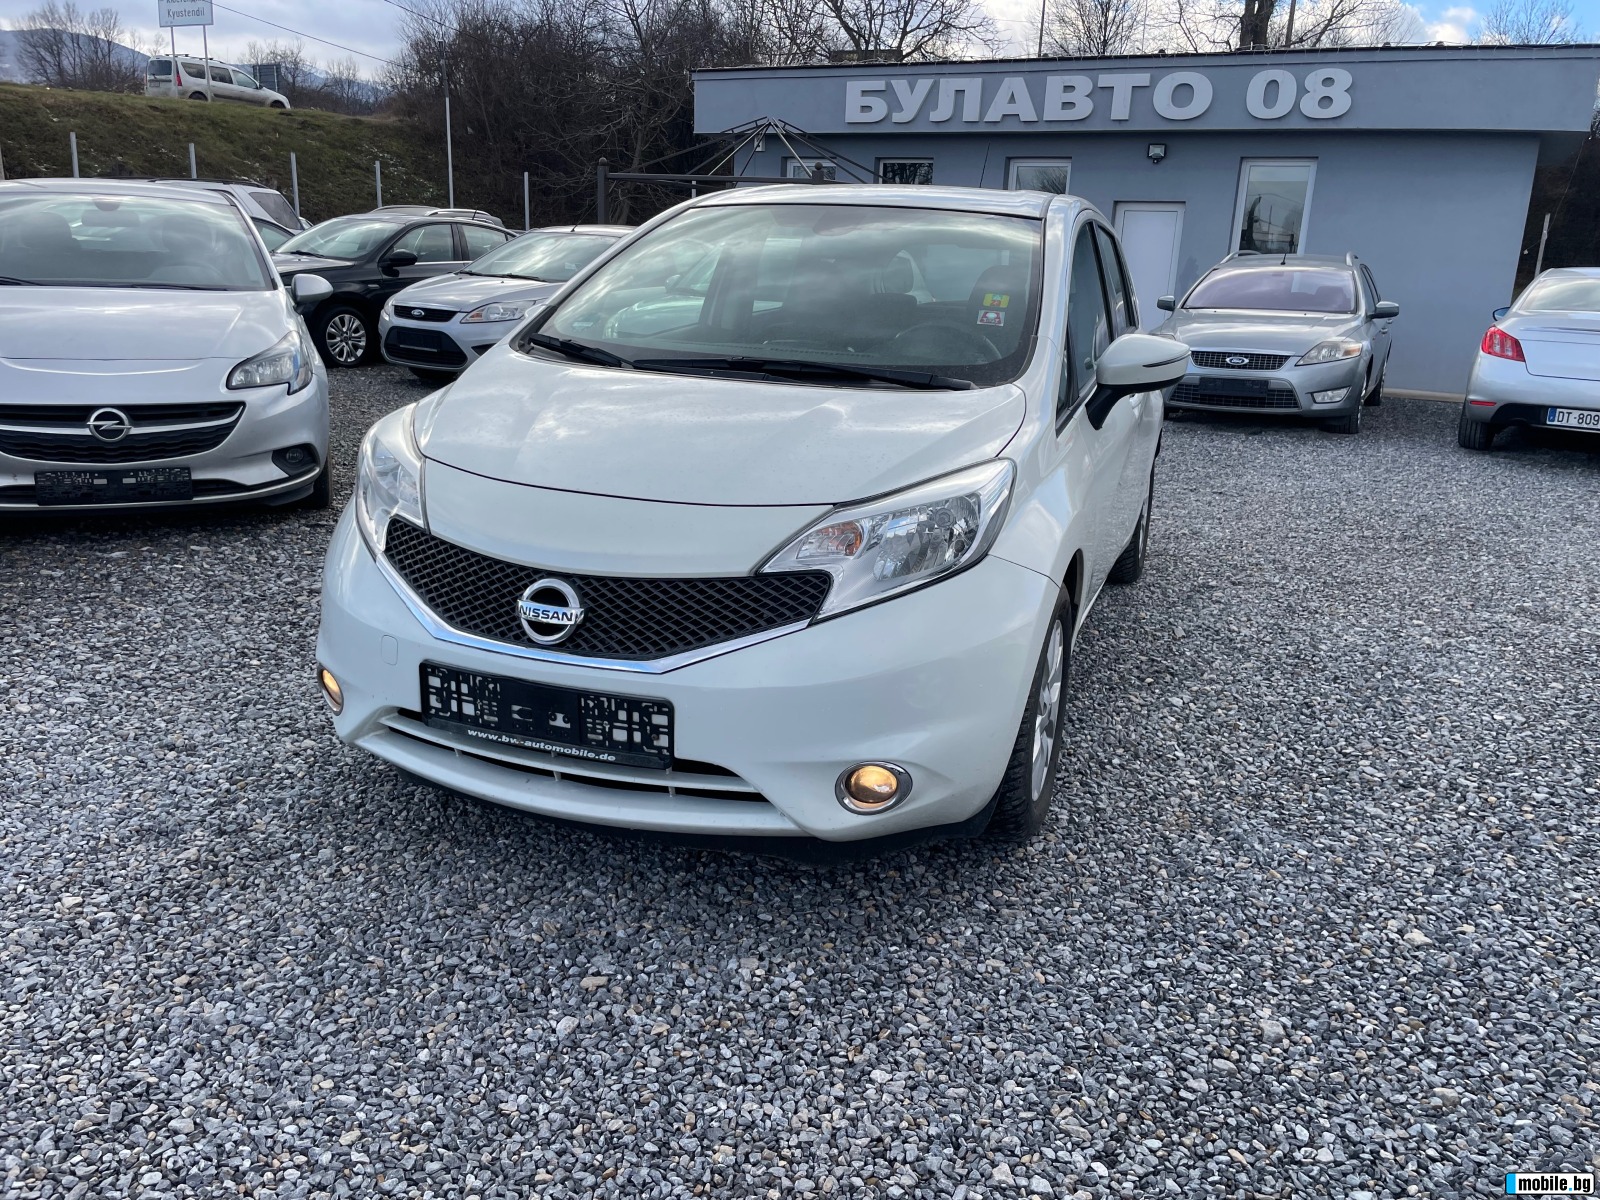 Nissan Note 1.5 DCI EVRO 5 | Mobile.bg   1